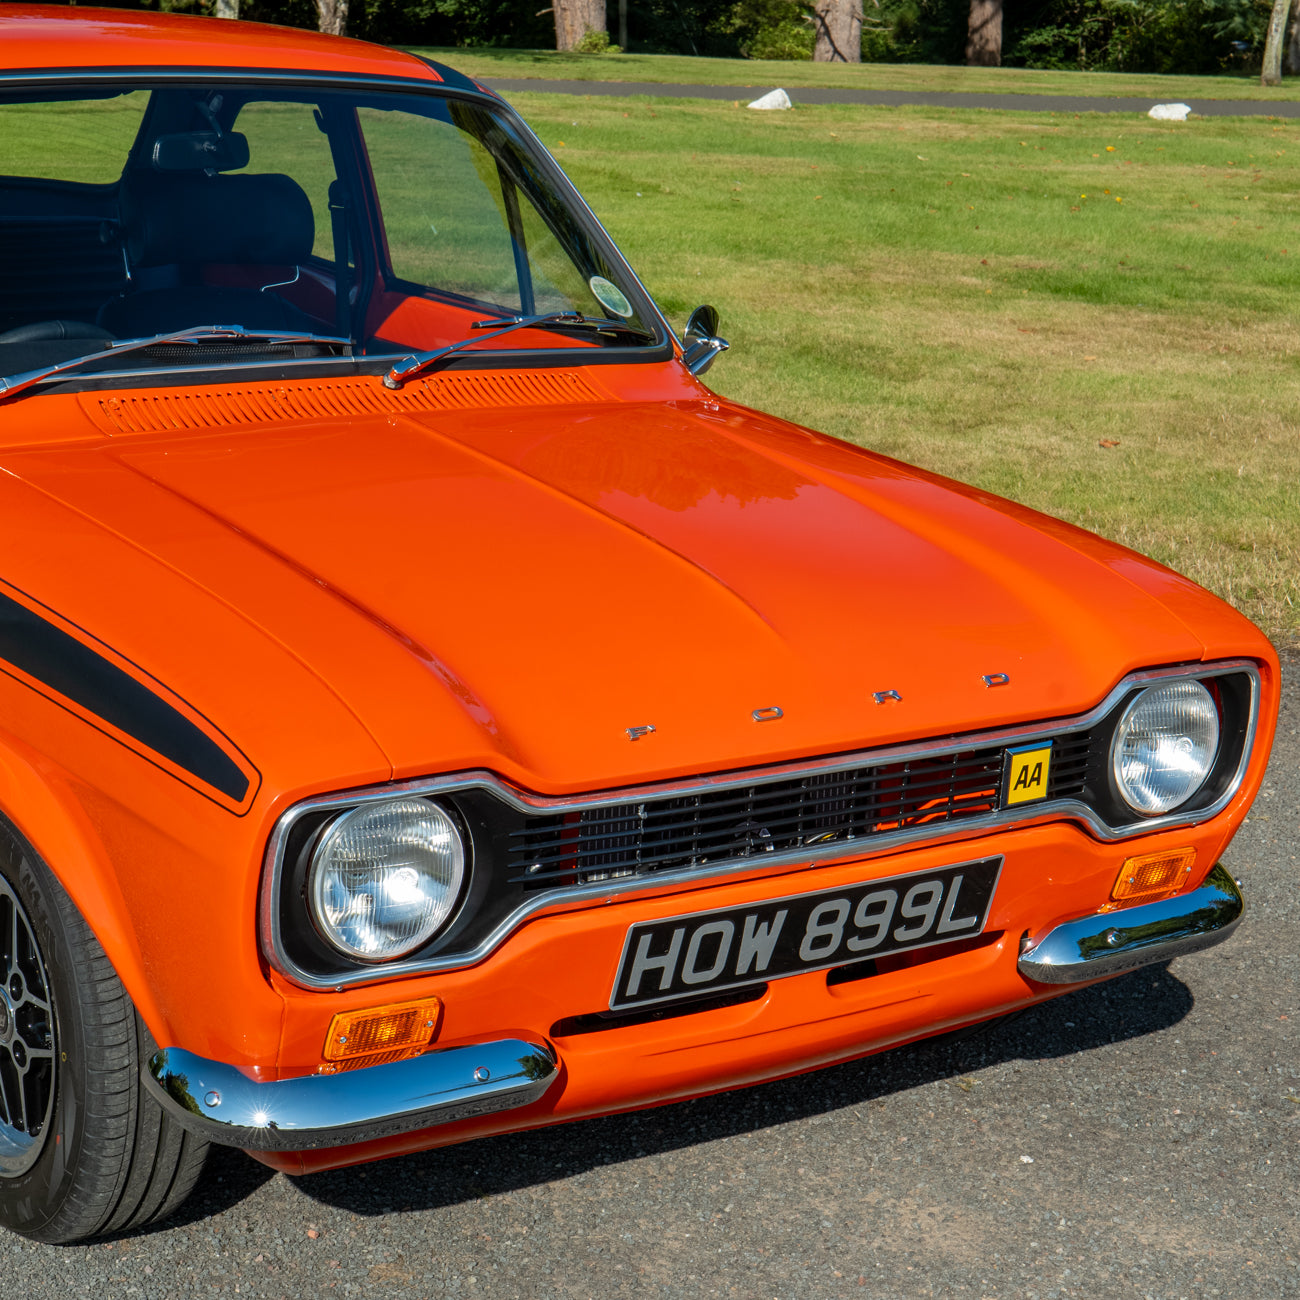 Fully Restored 1973 Mk1 Ford Escort Mexico Recreation – The Giveaway Guys